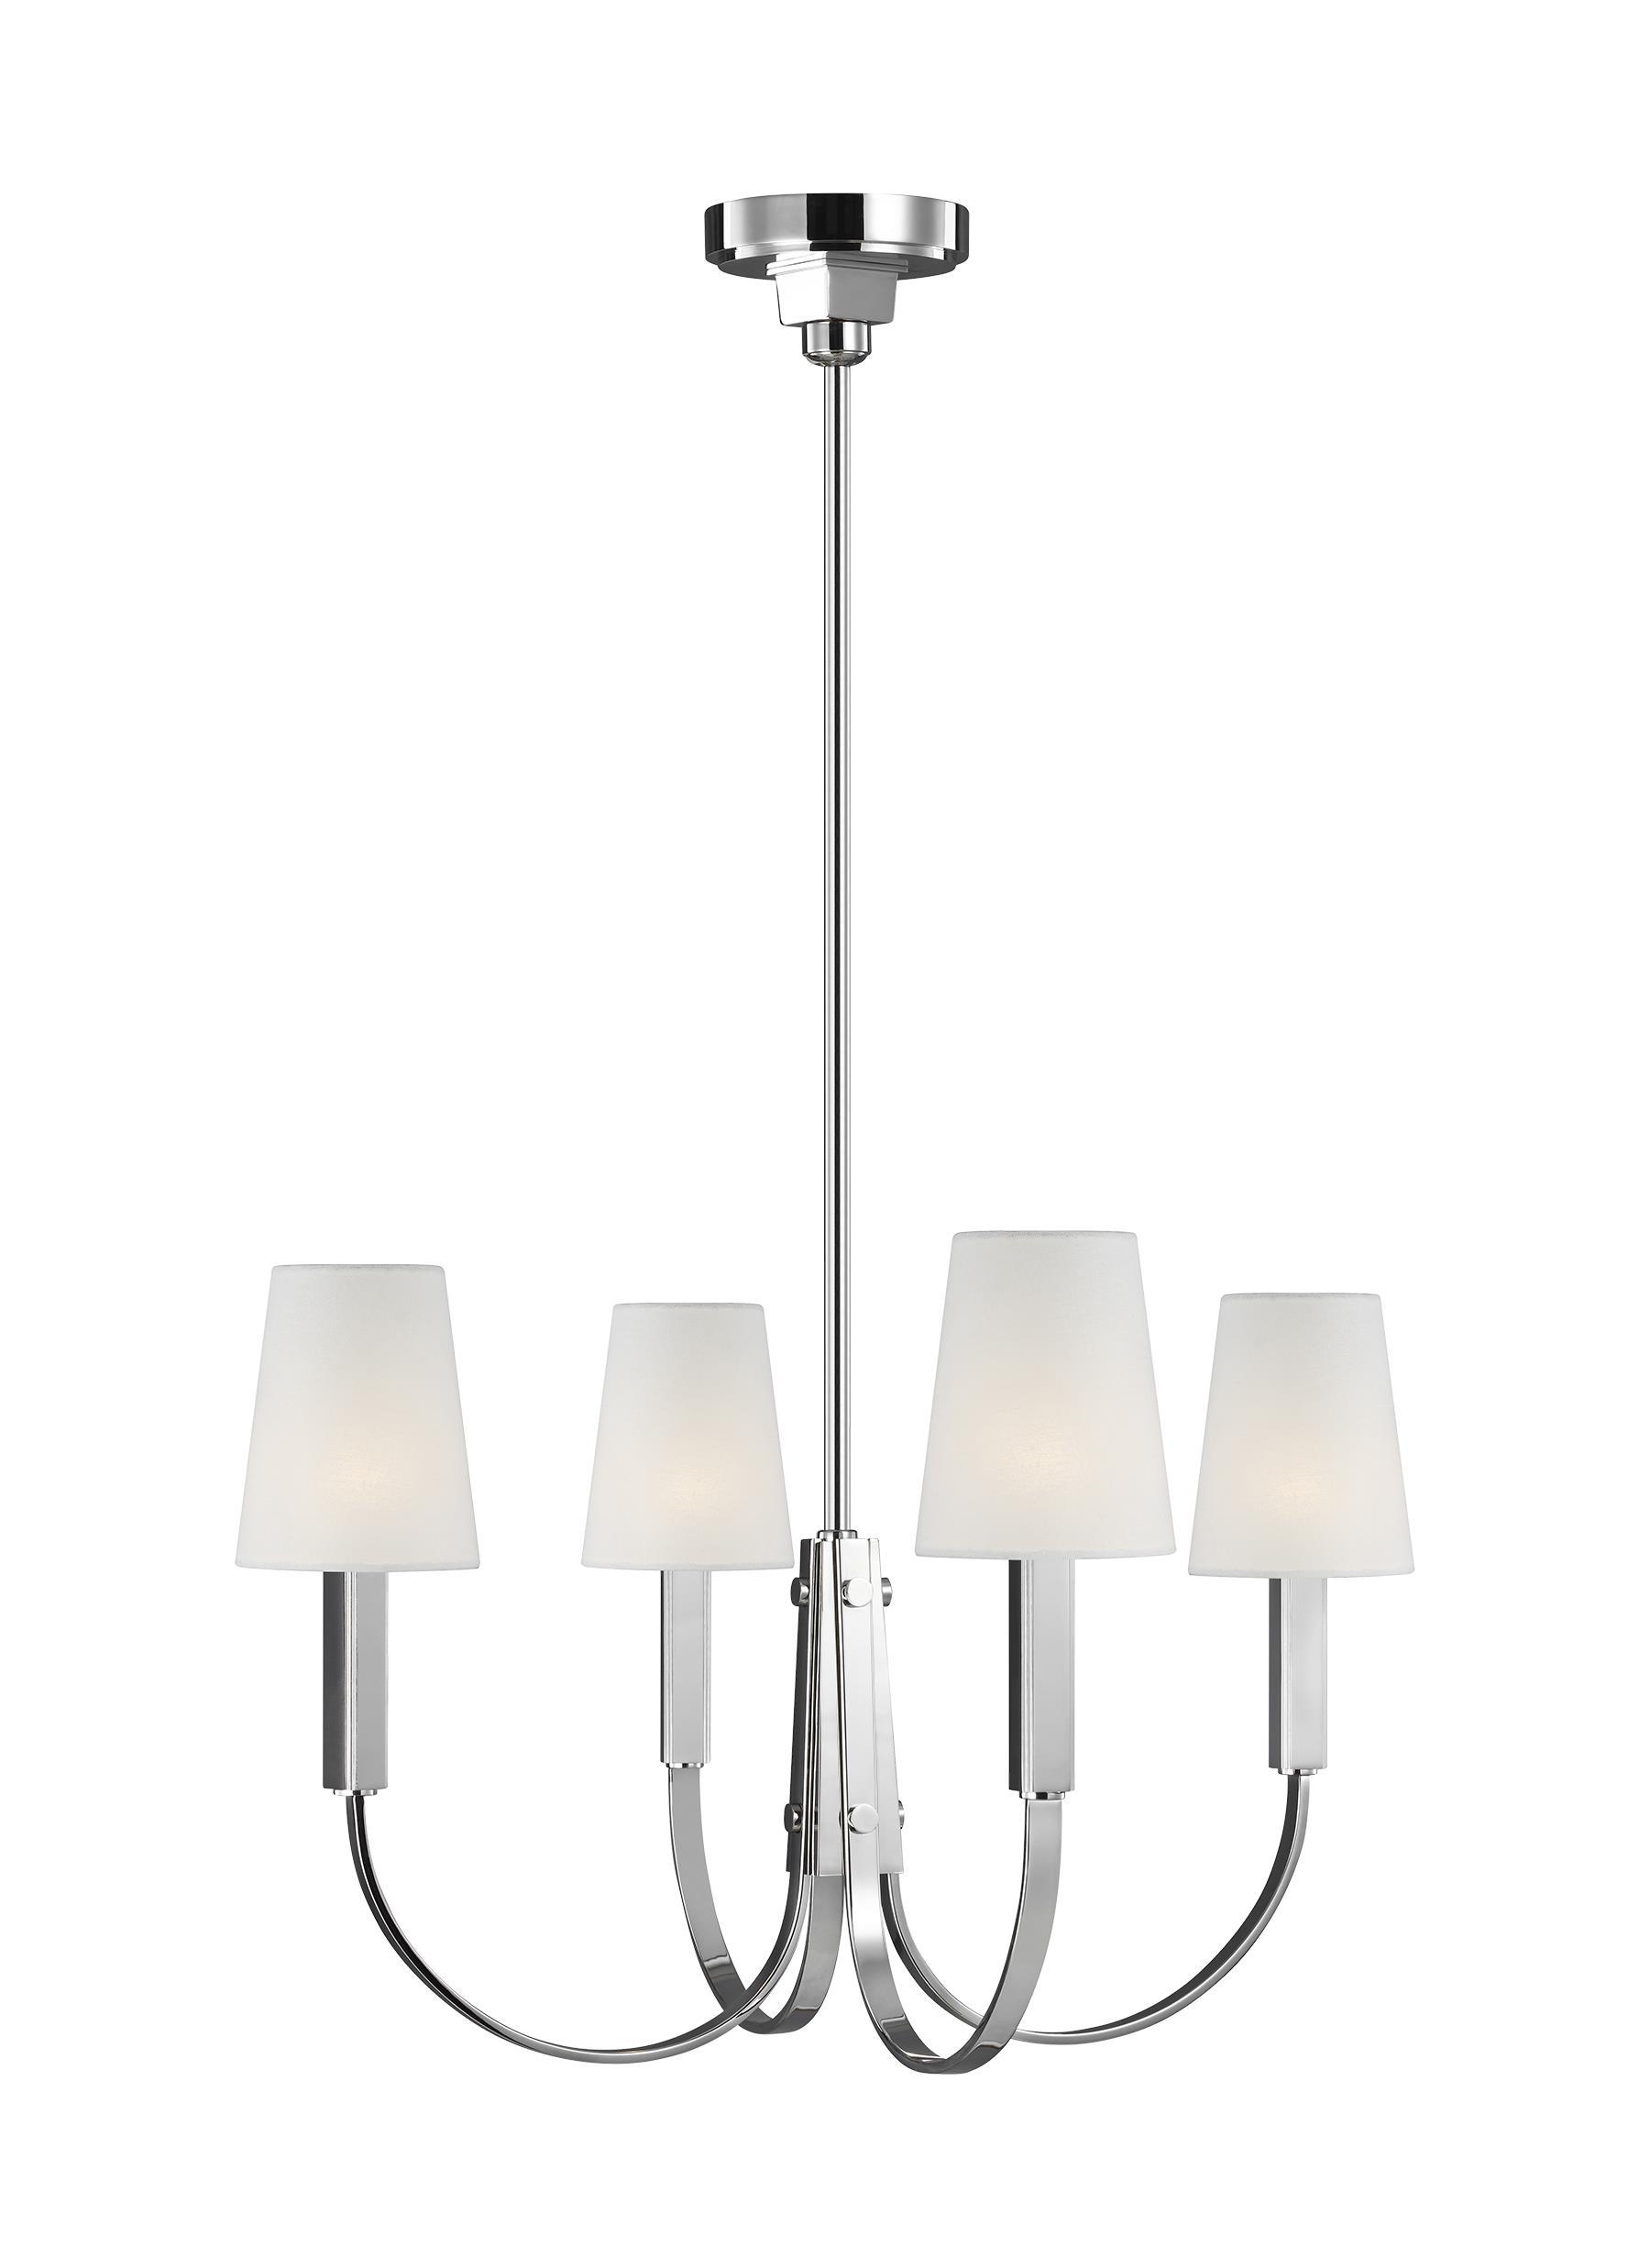 Logan Polished Nickel 4-Light Chandelier Ceiling Feiss 